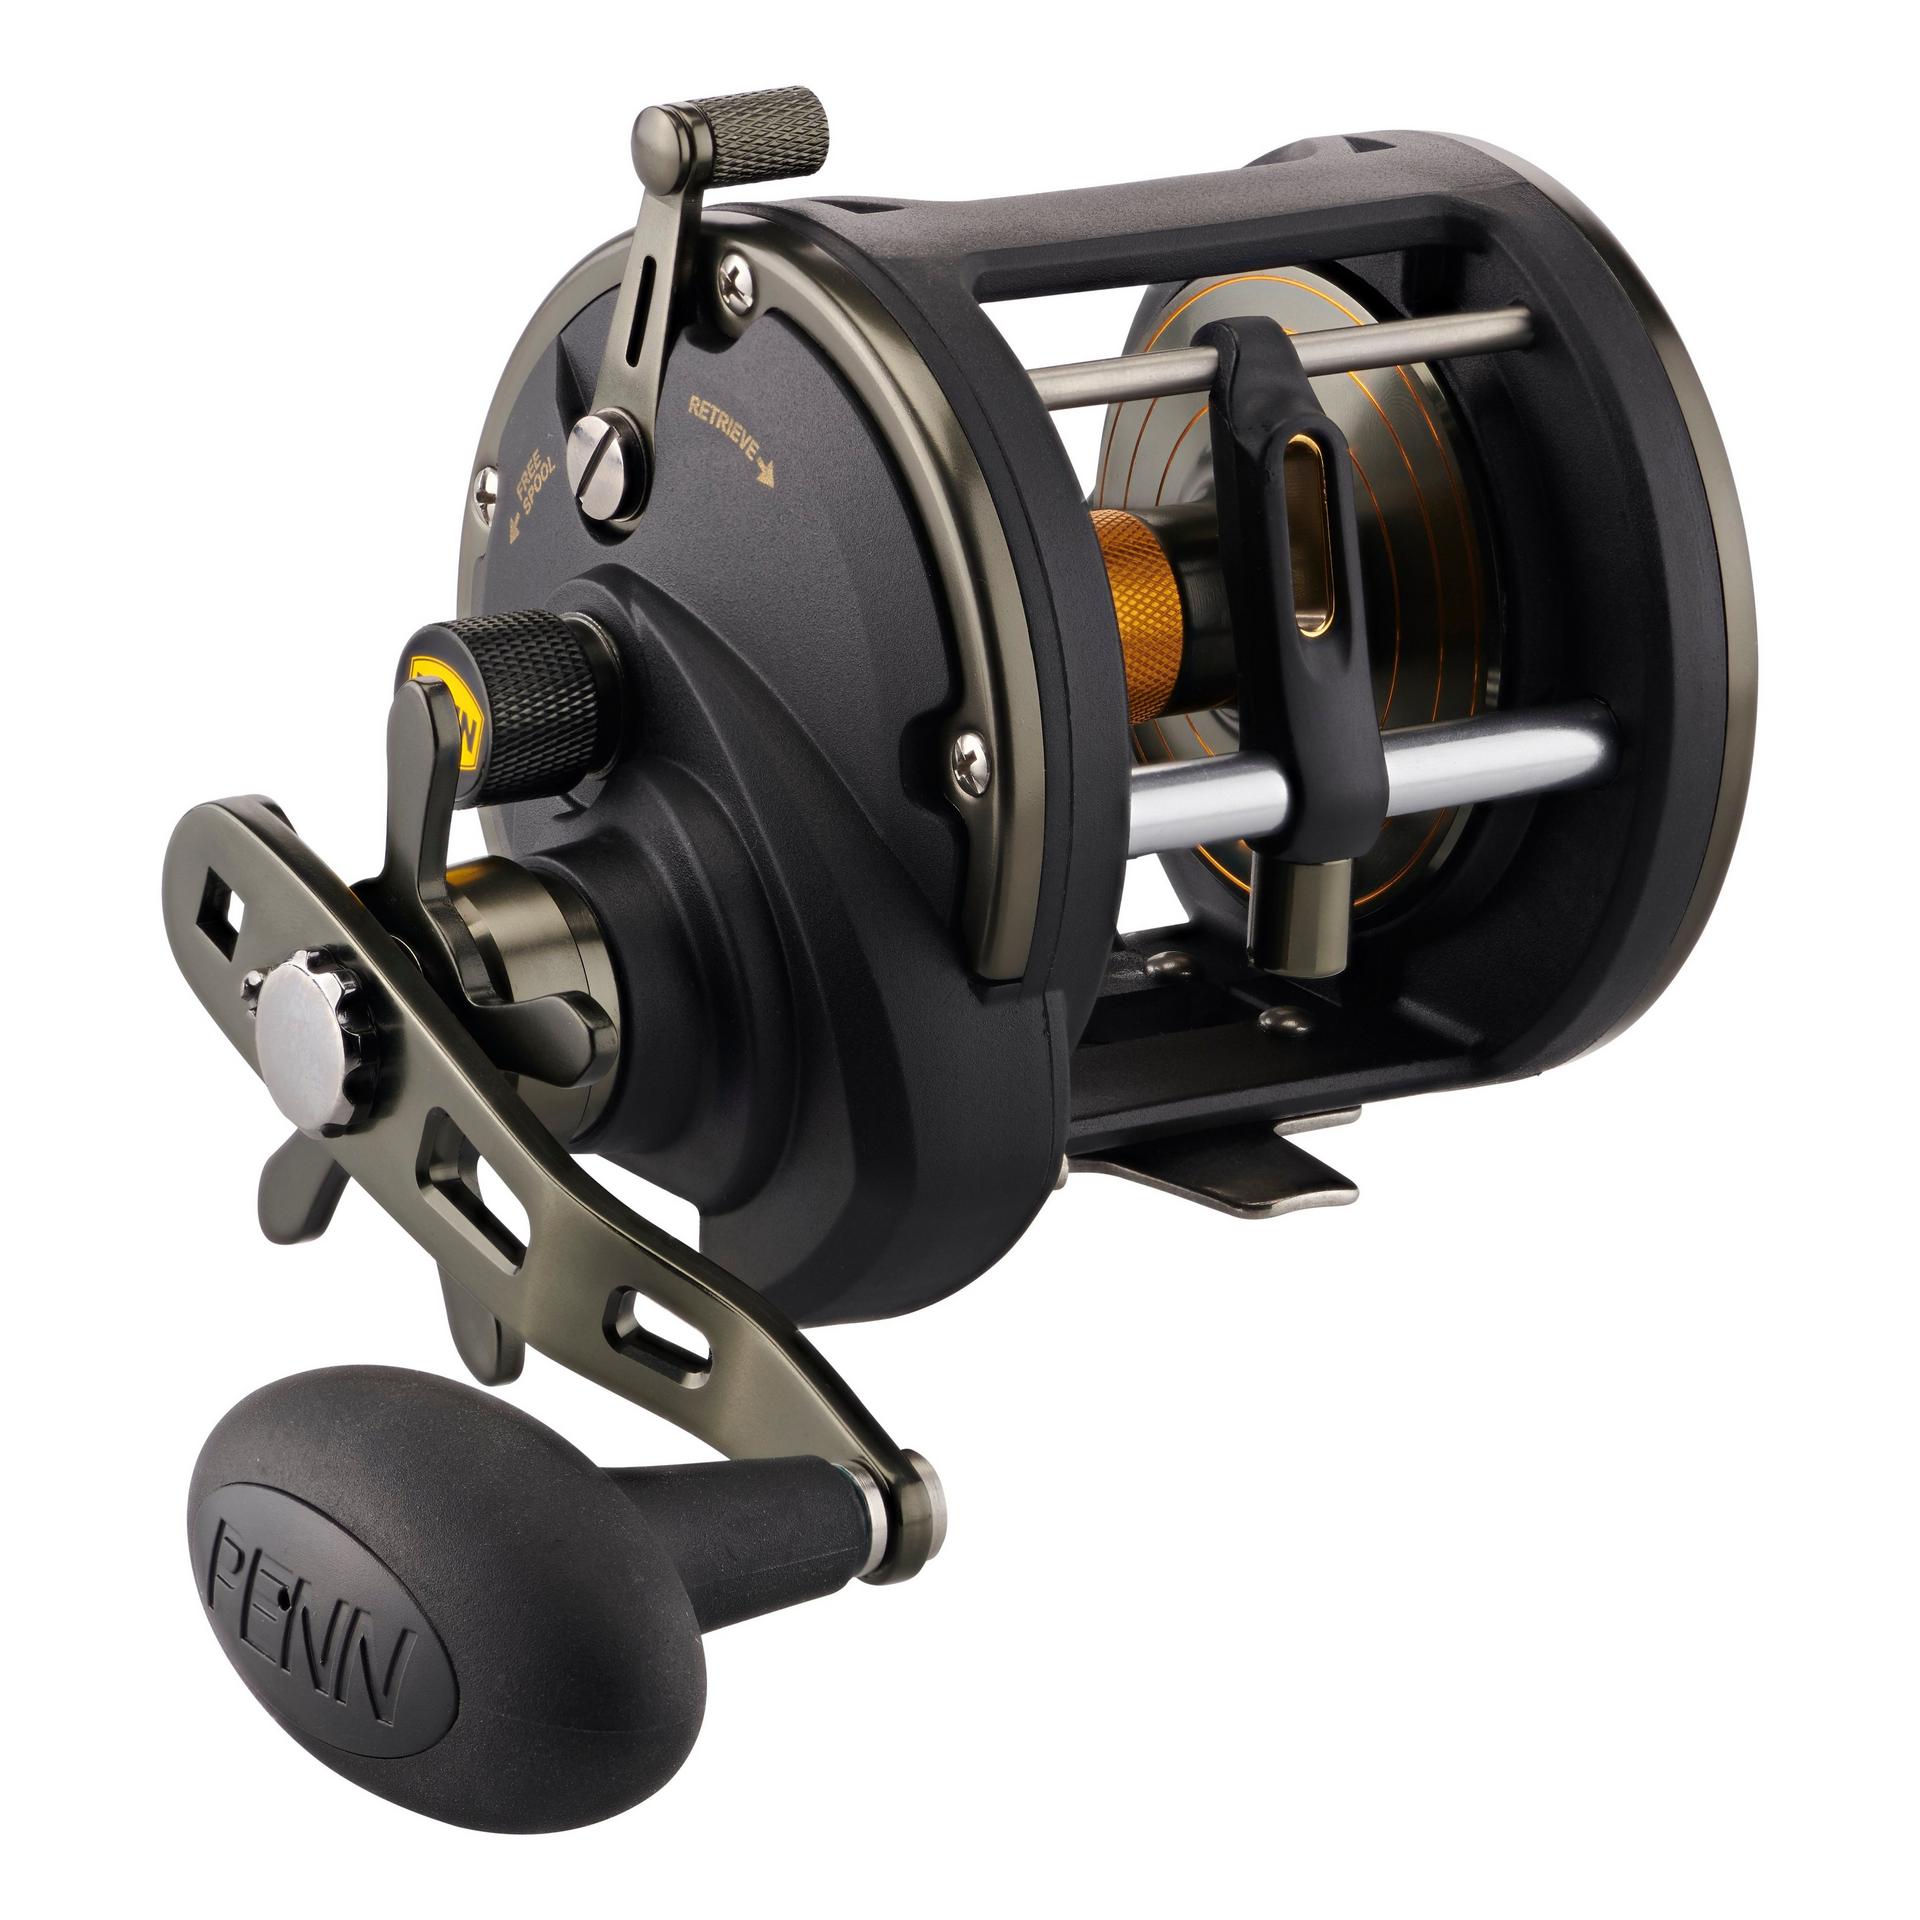 Penn SQL50LW Squall Levelwind Saltwater Fish Trolling Fishing Reel, Black &  Gold, 1 Piece - Smith's Food and Drug